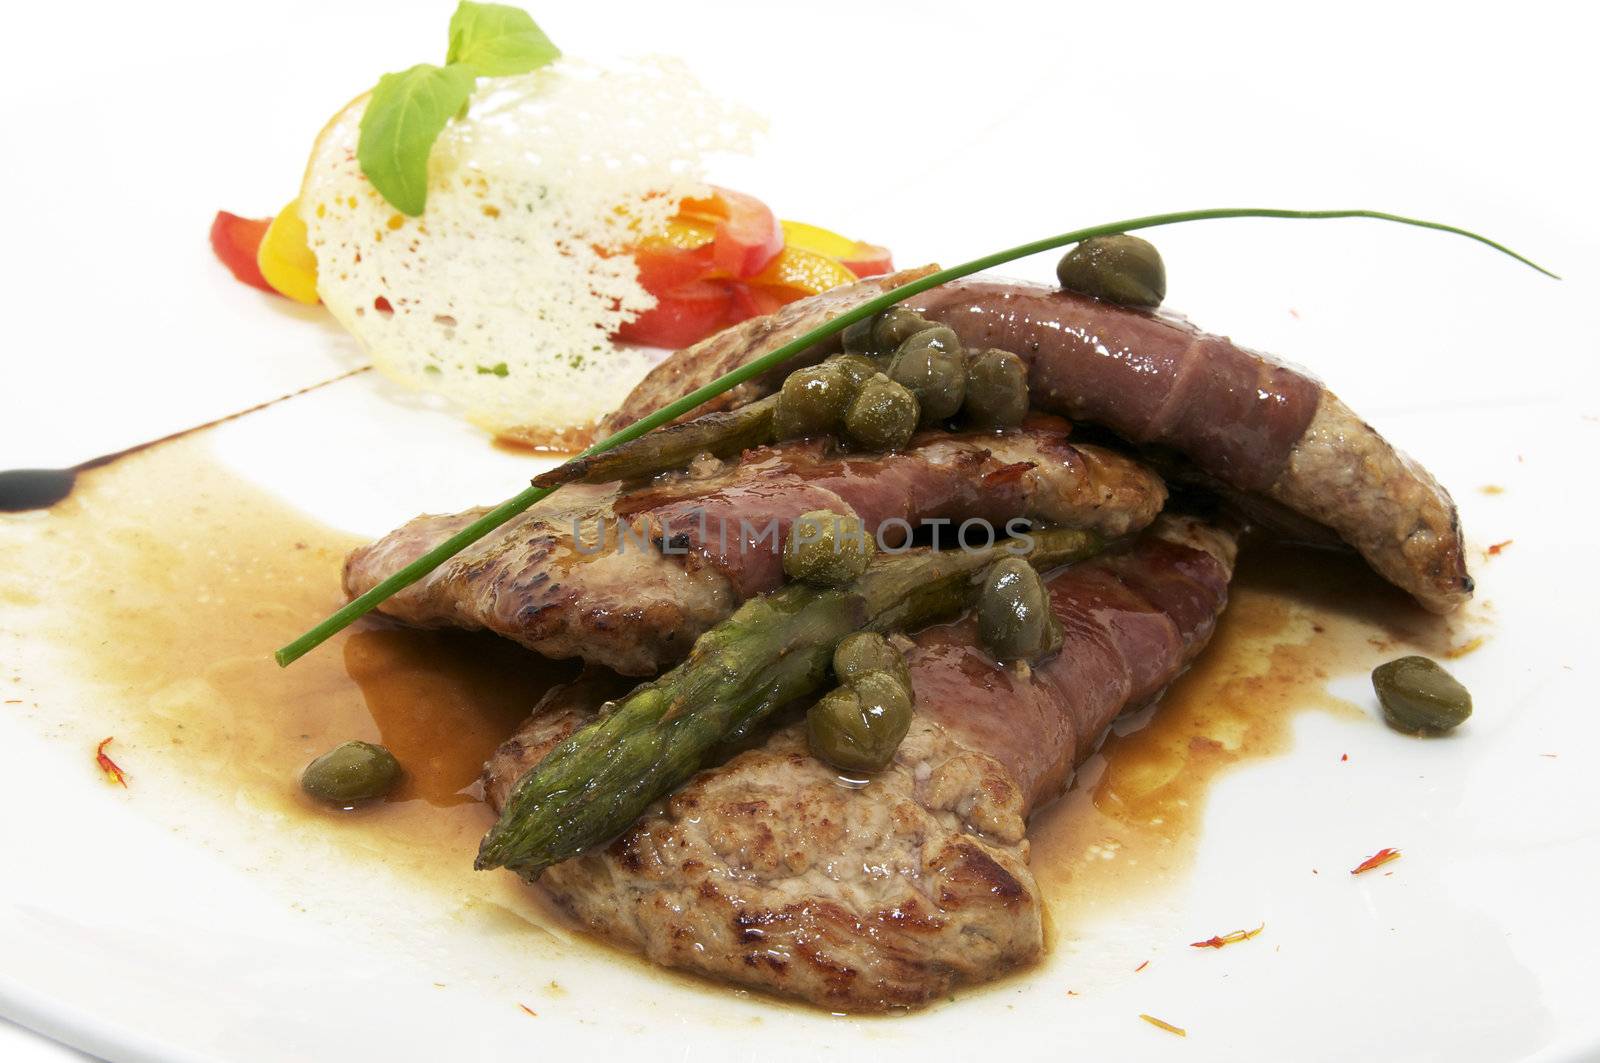 grilled meat with asparagus by Lester120